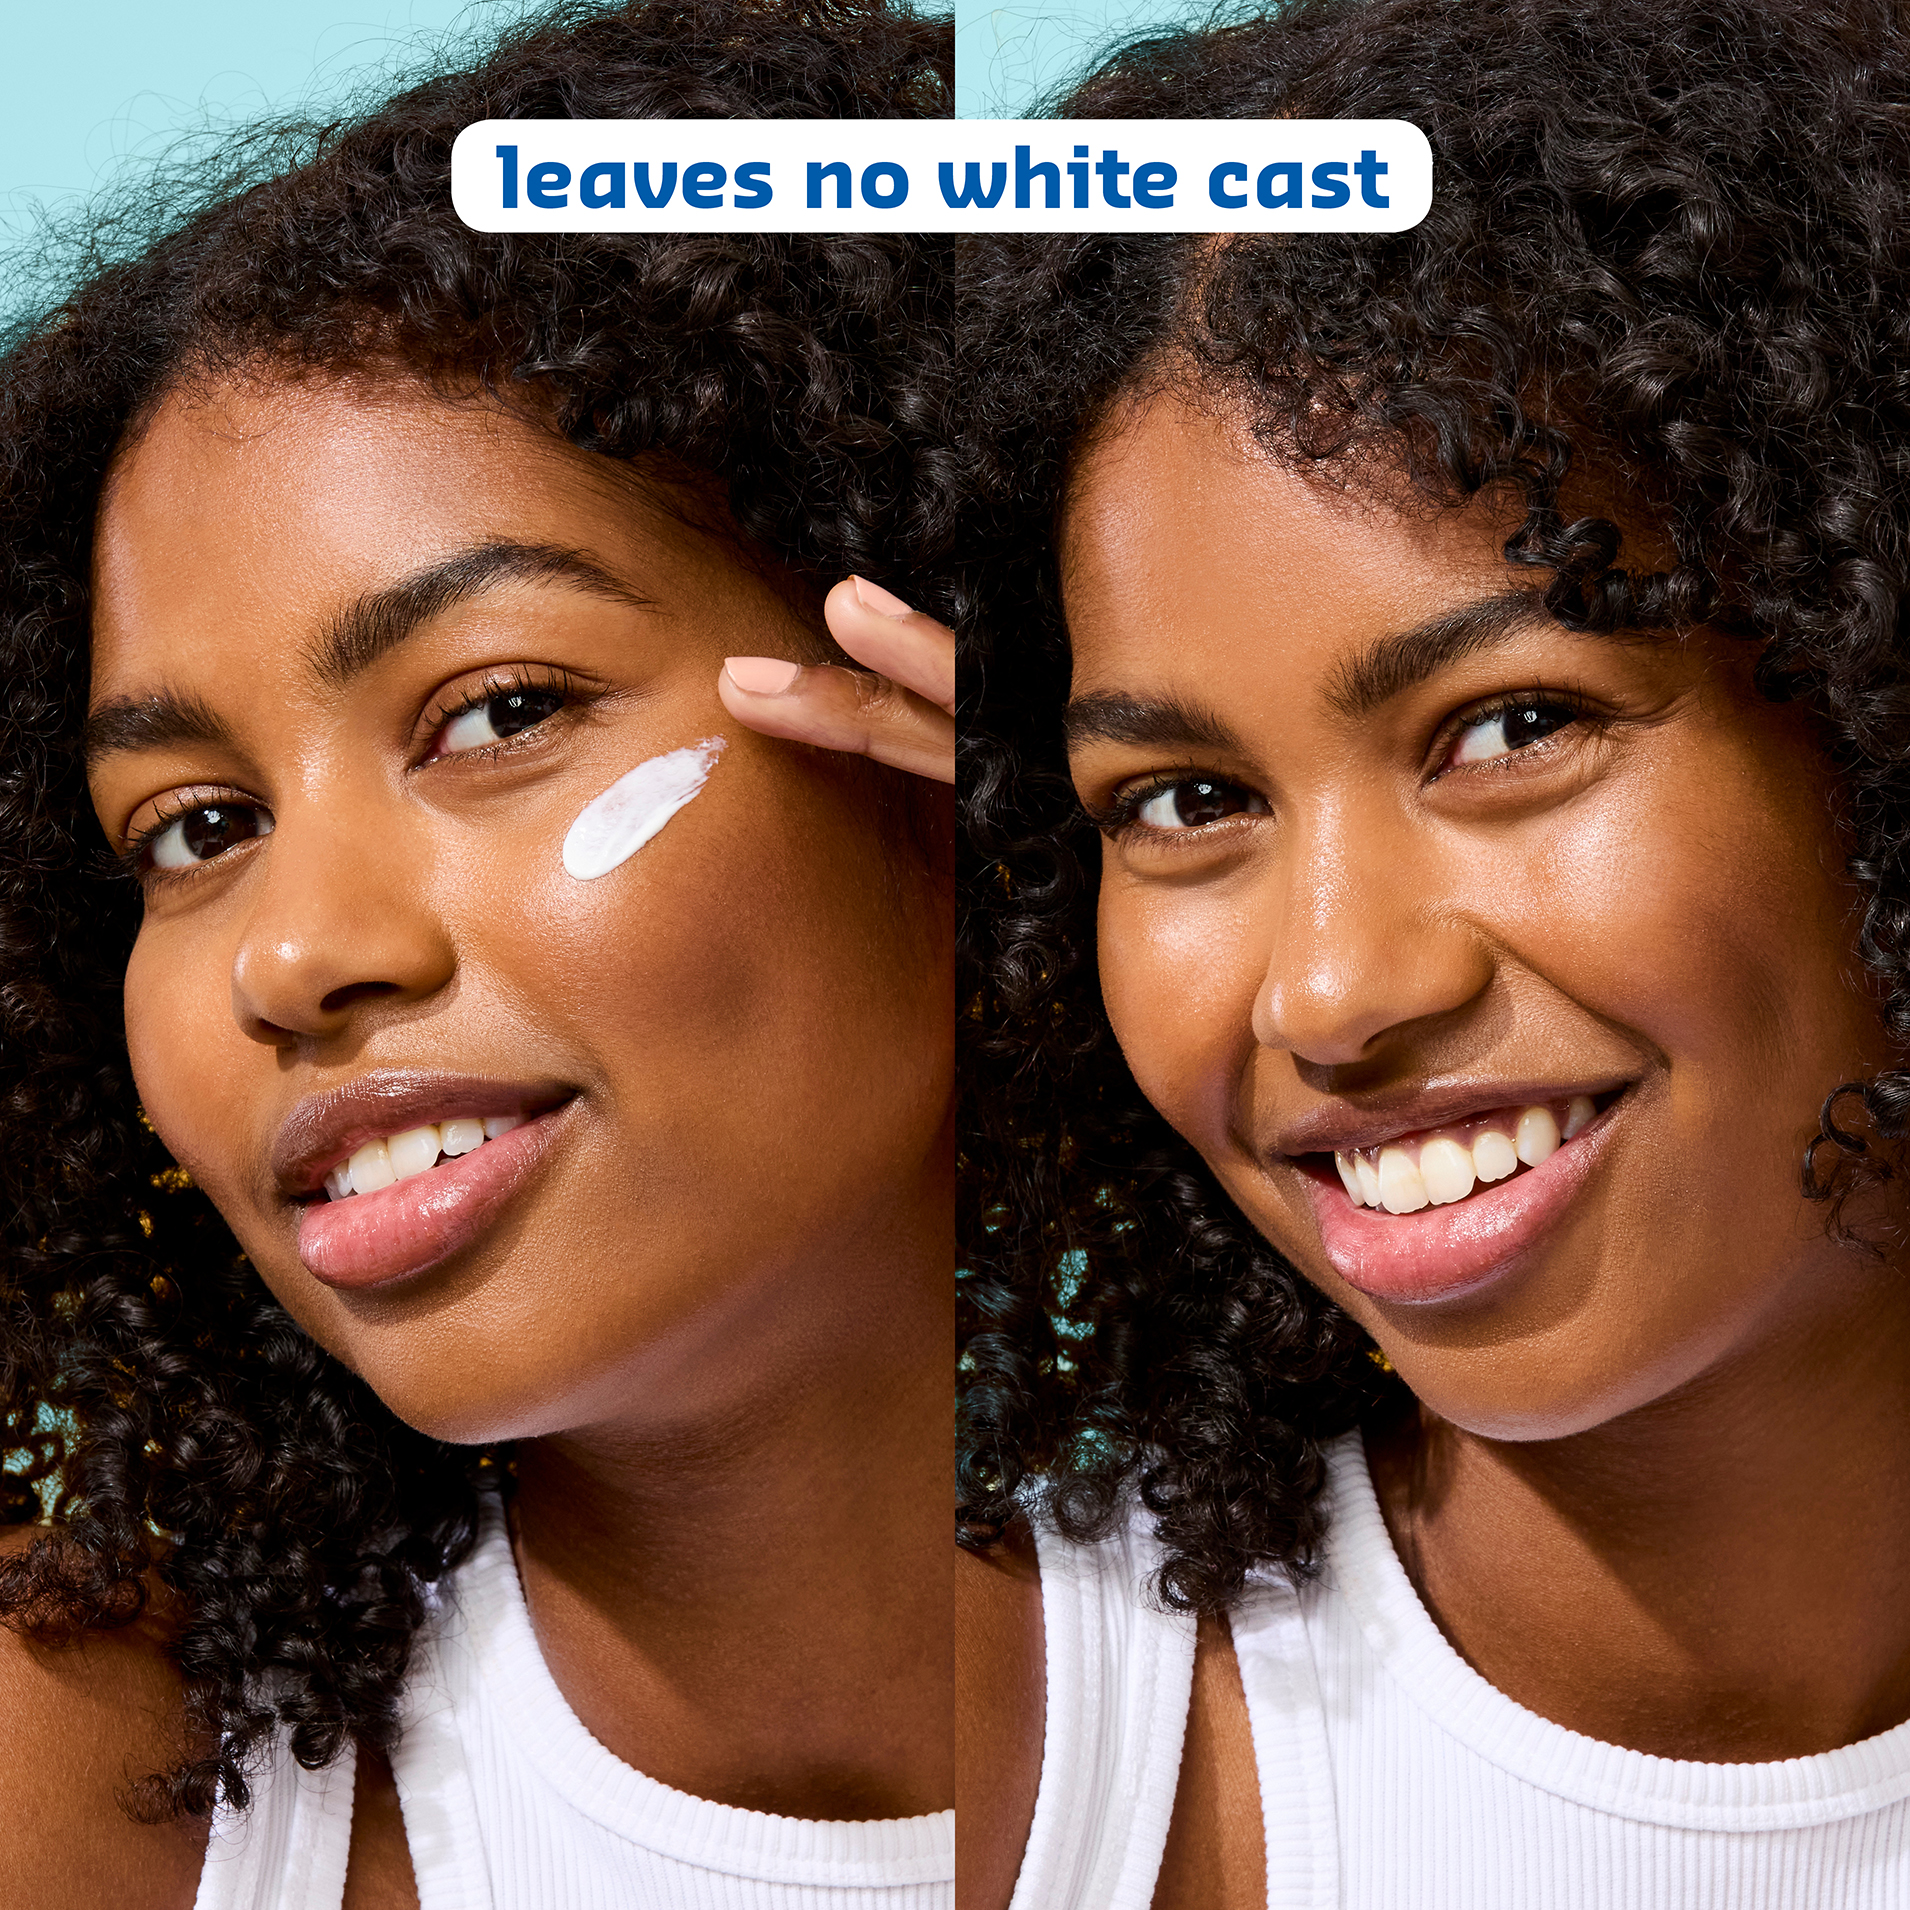 A before and after photo of a model applying a white cream to her cheek, with the after photo showing no white cast on her skin